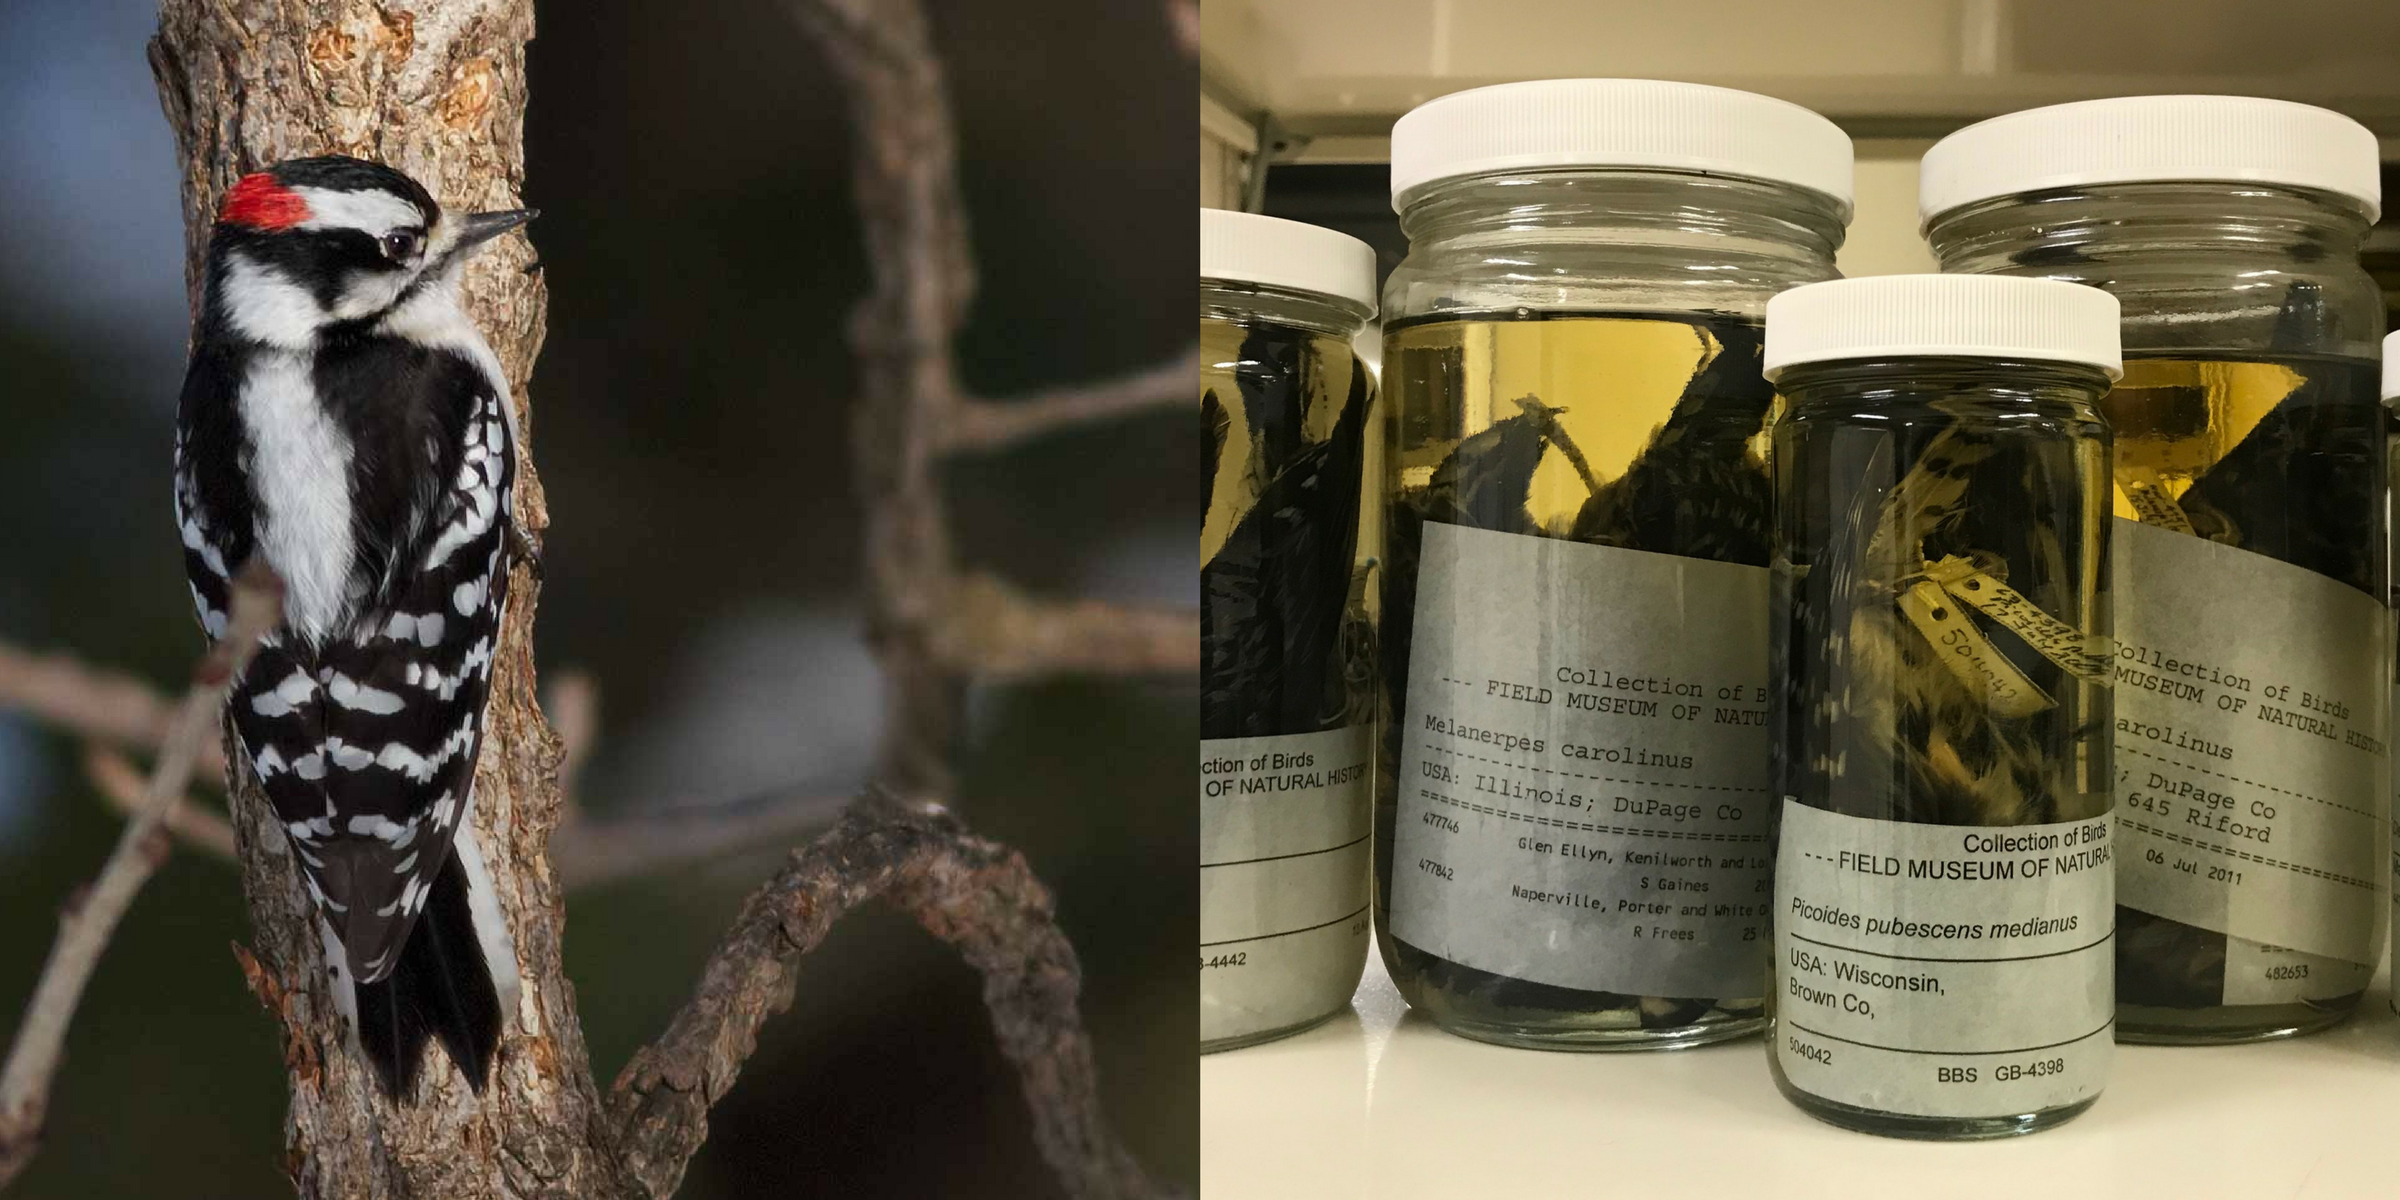 Two photos, one of a black and white bird with a red head on a tree; one of a row of jars of museum specimens